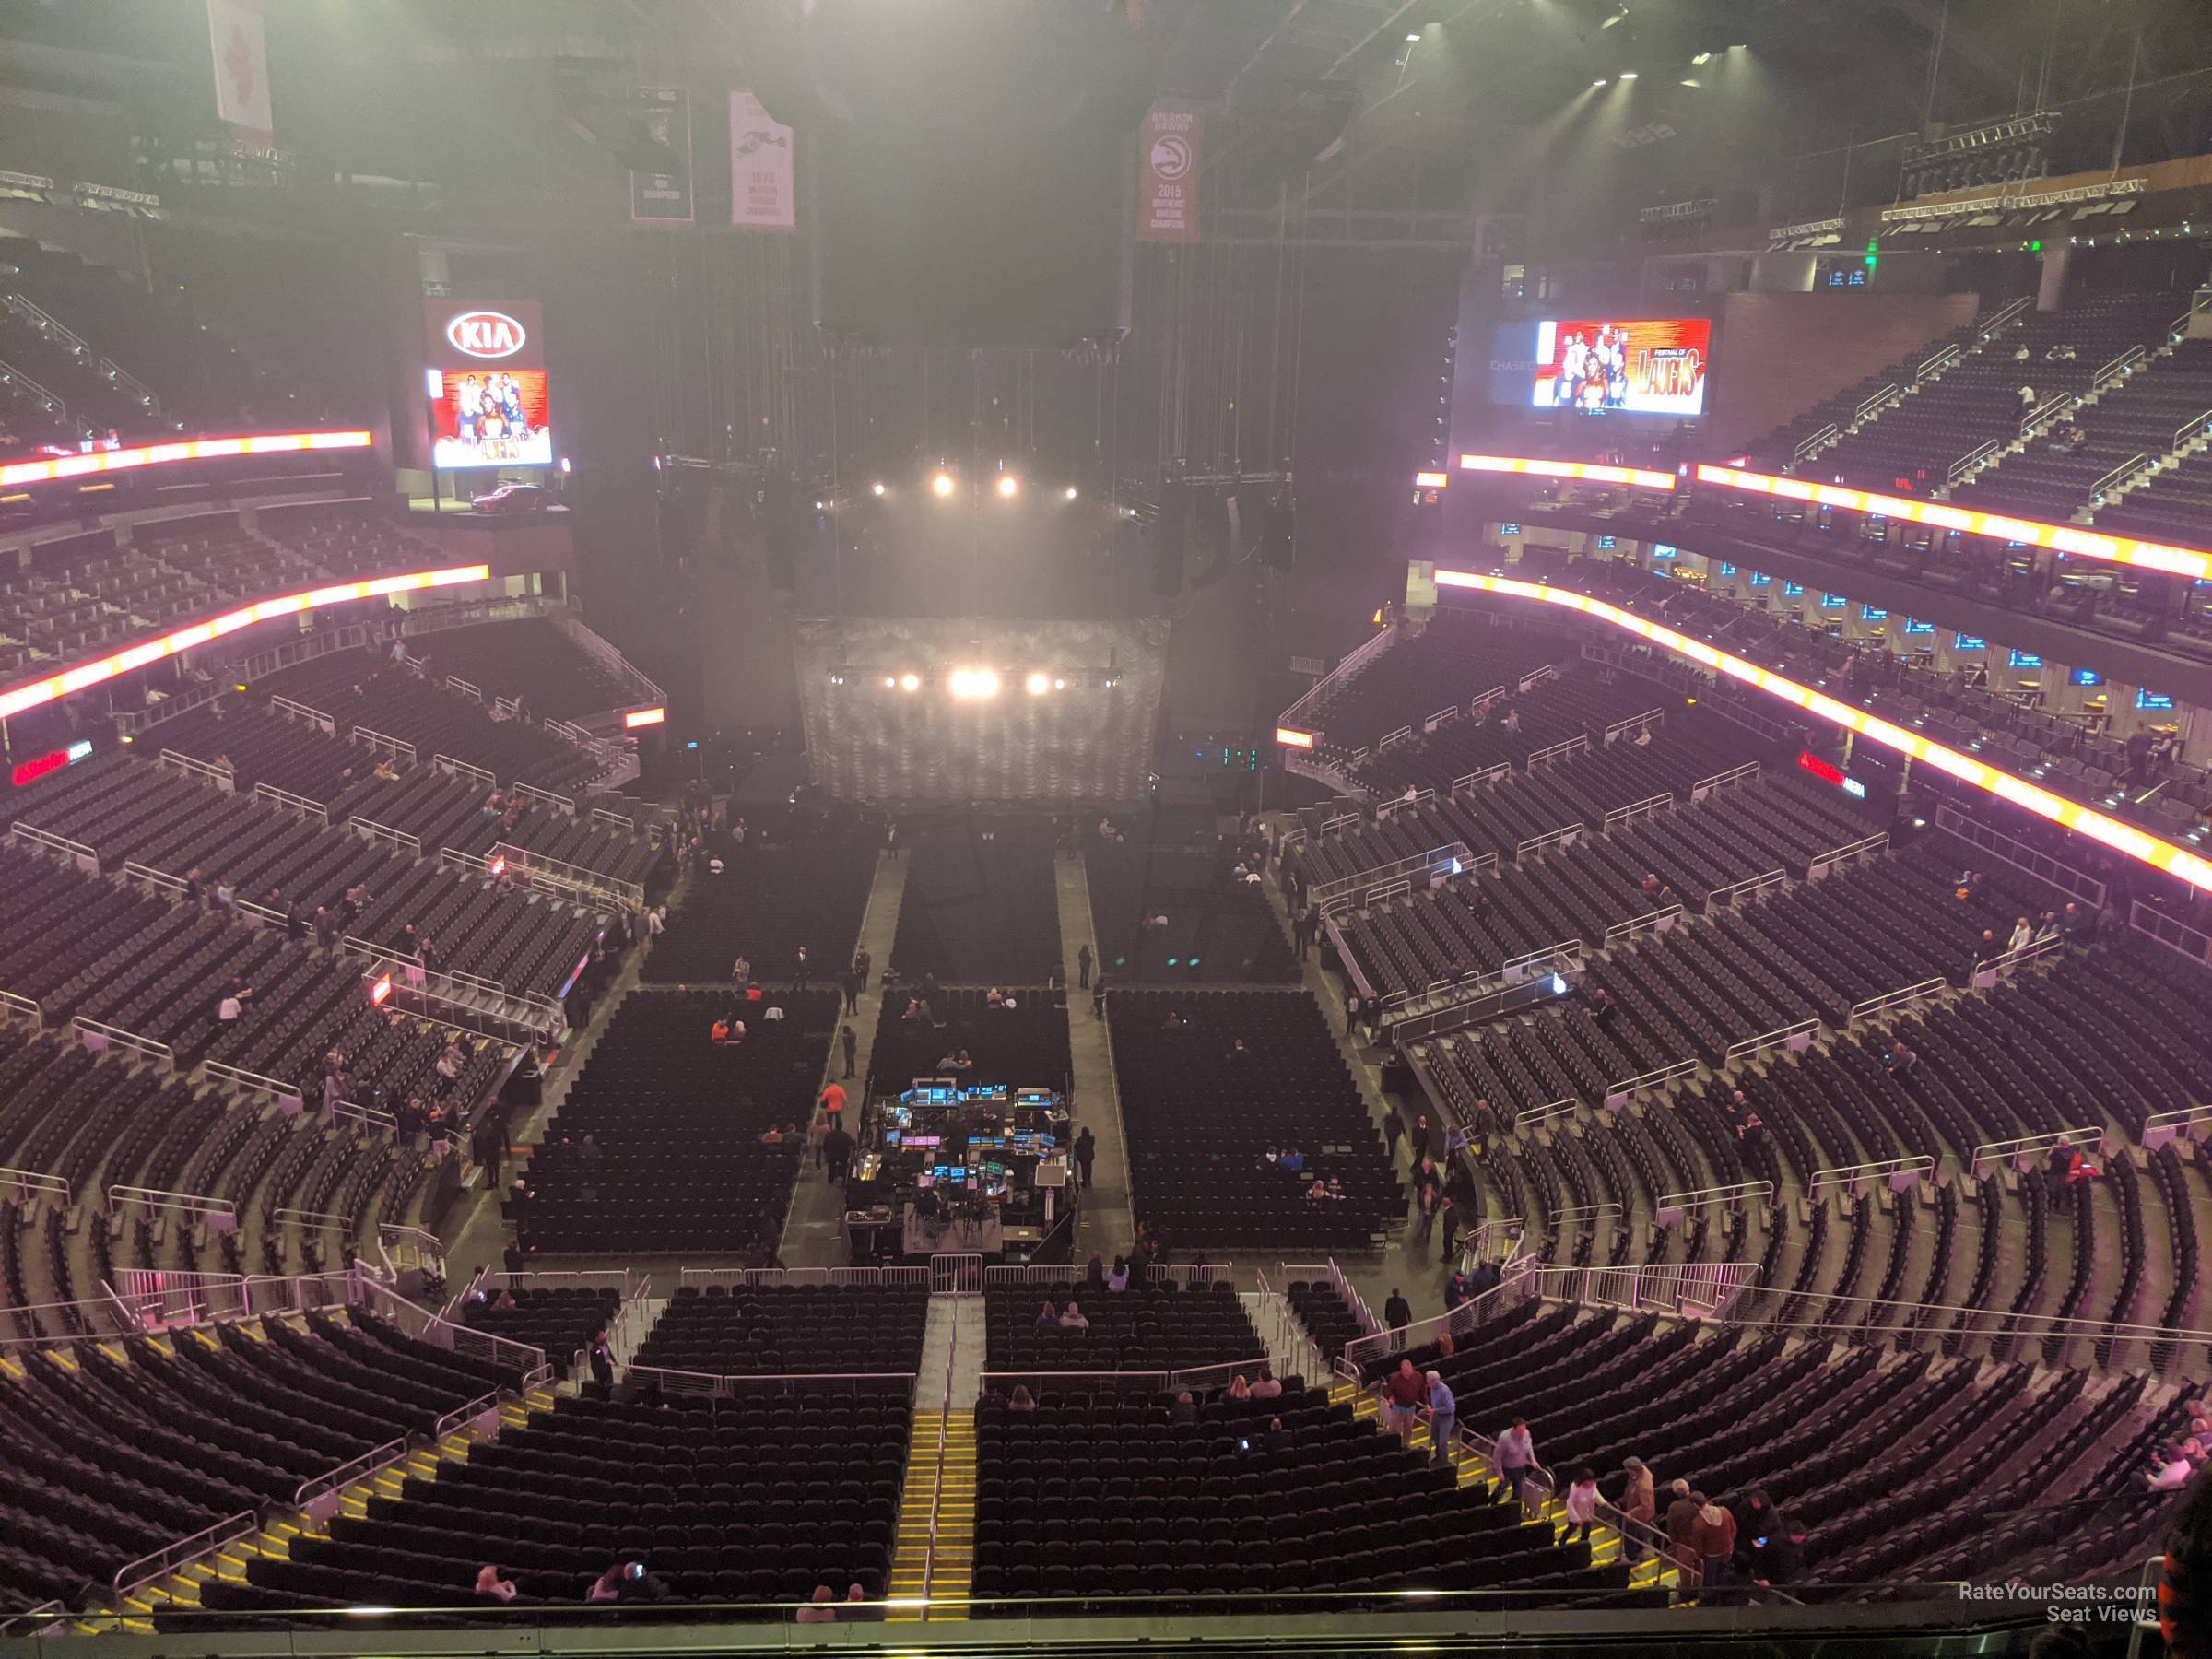 State Farm Arena Section 215 Concert Seating